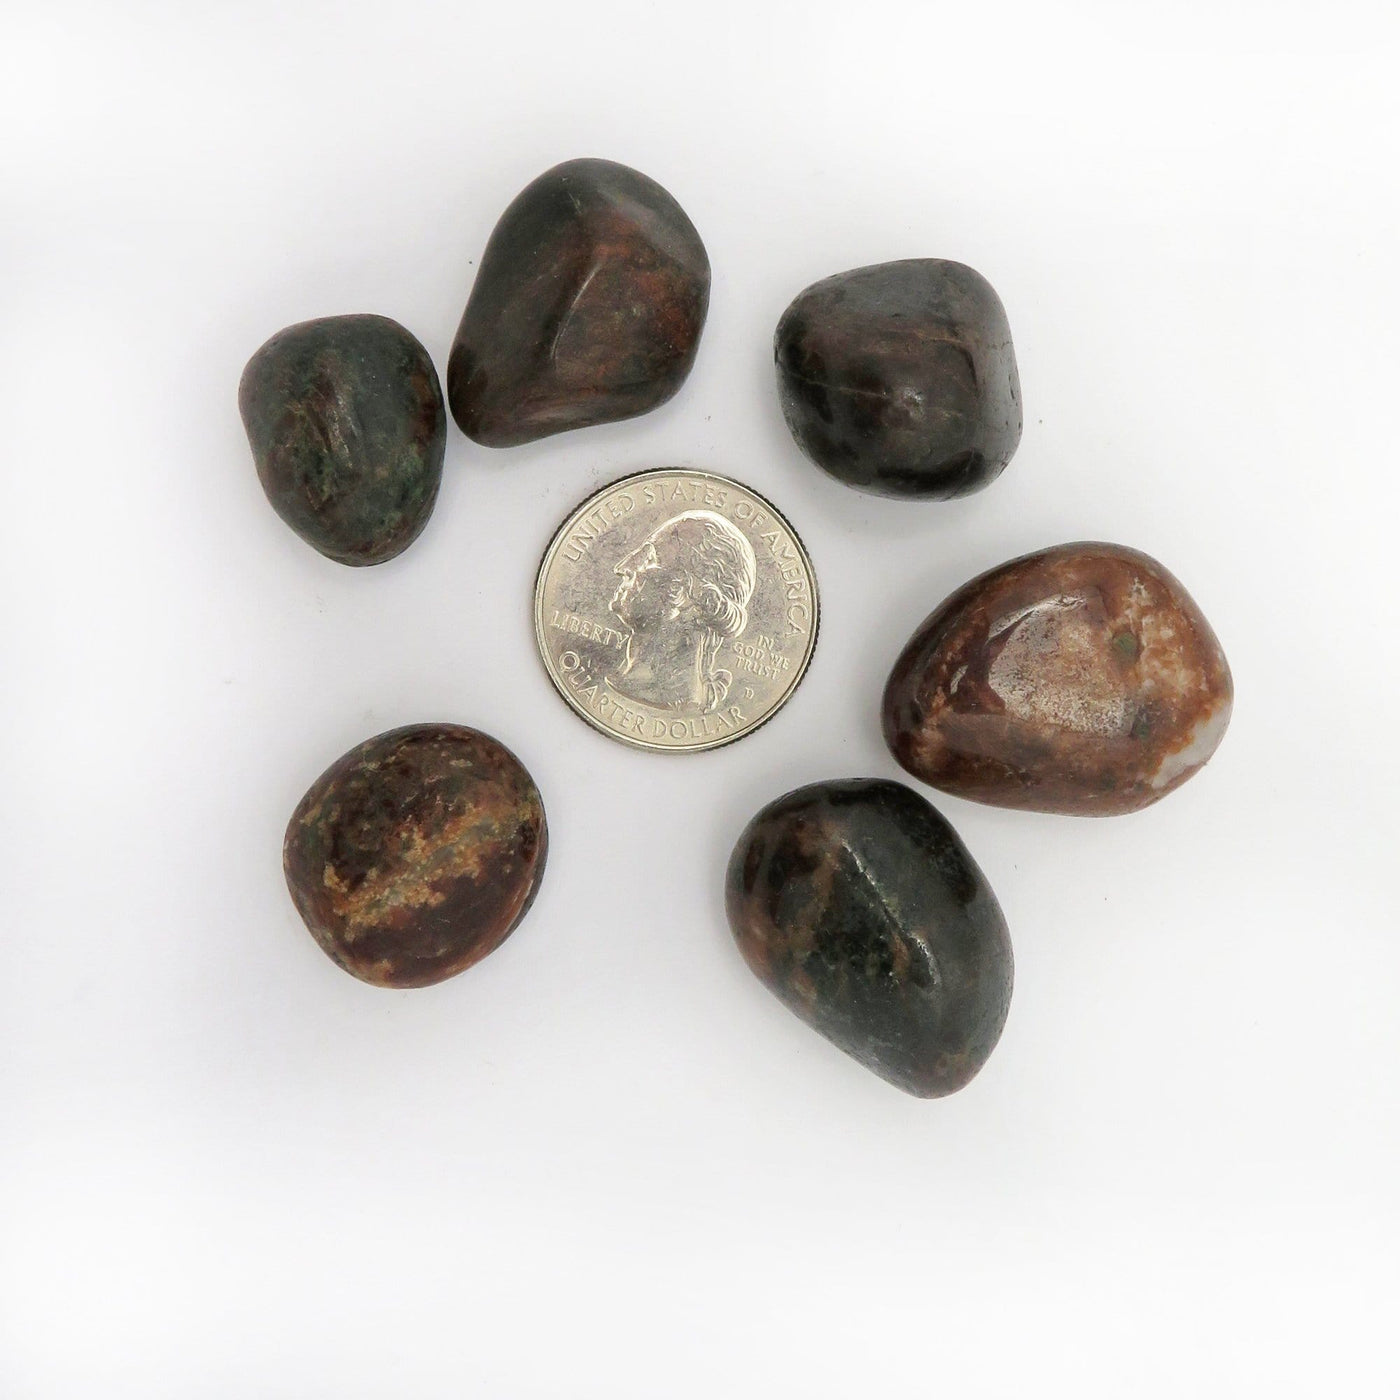 tumbled bloodstone surrounding a quarter for size reference